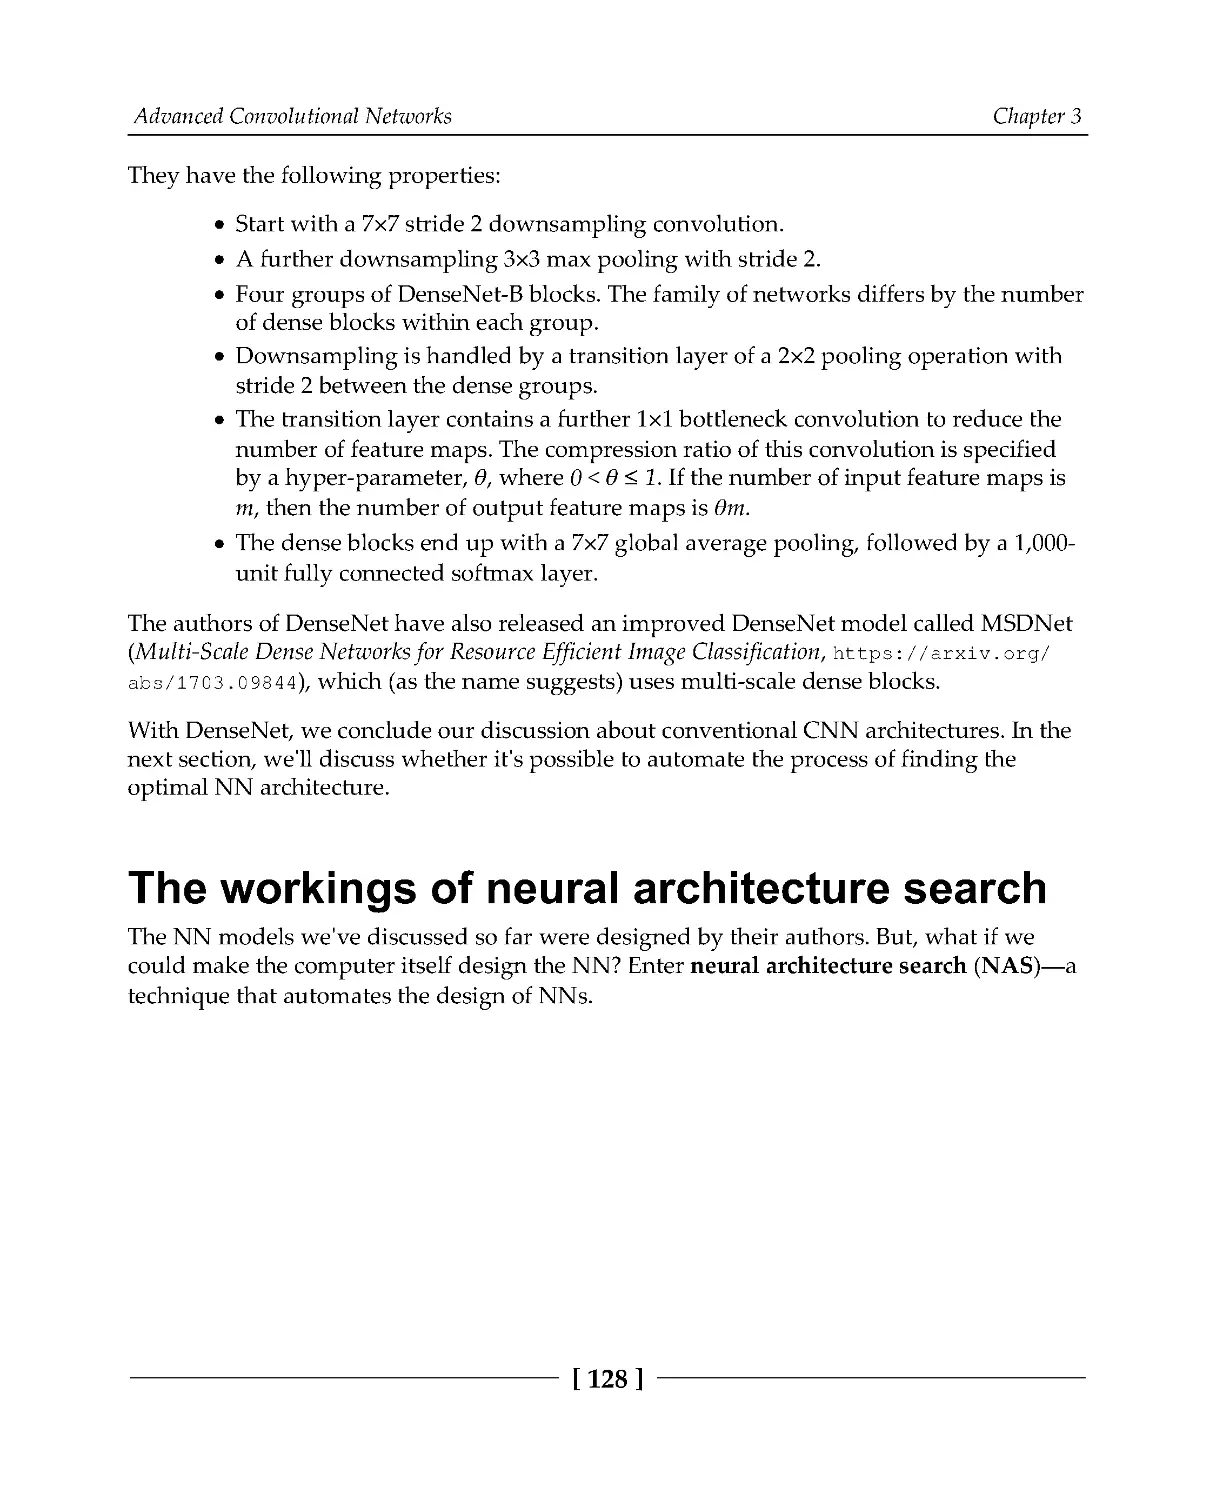 The workings of neural architecture search